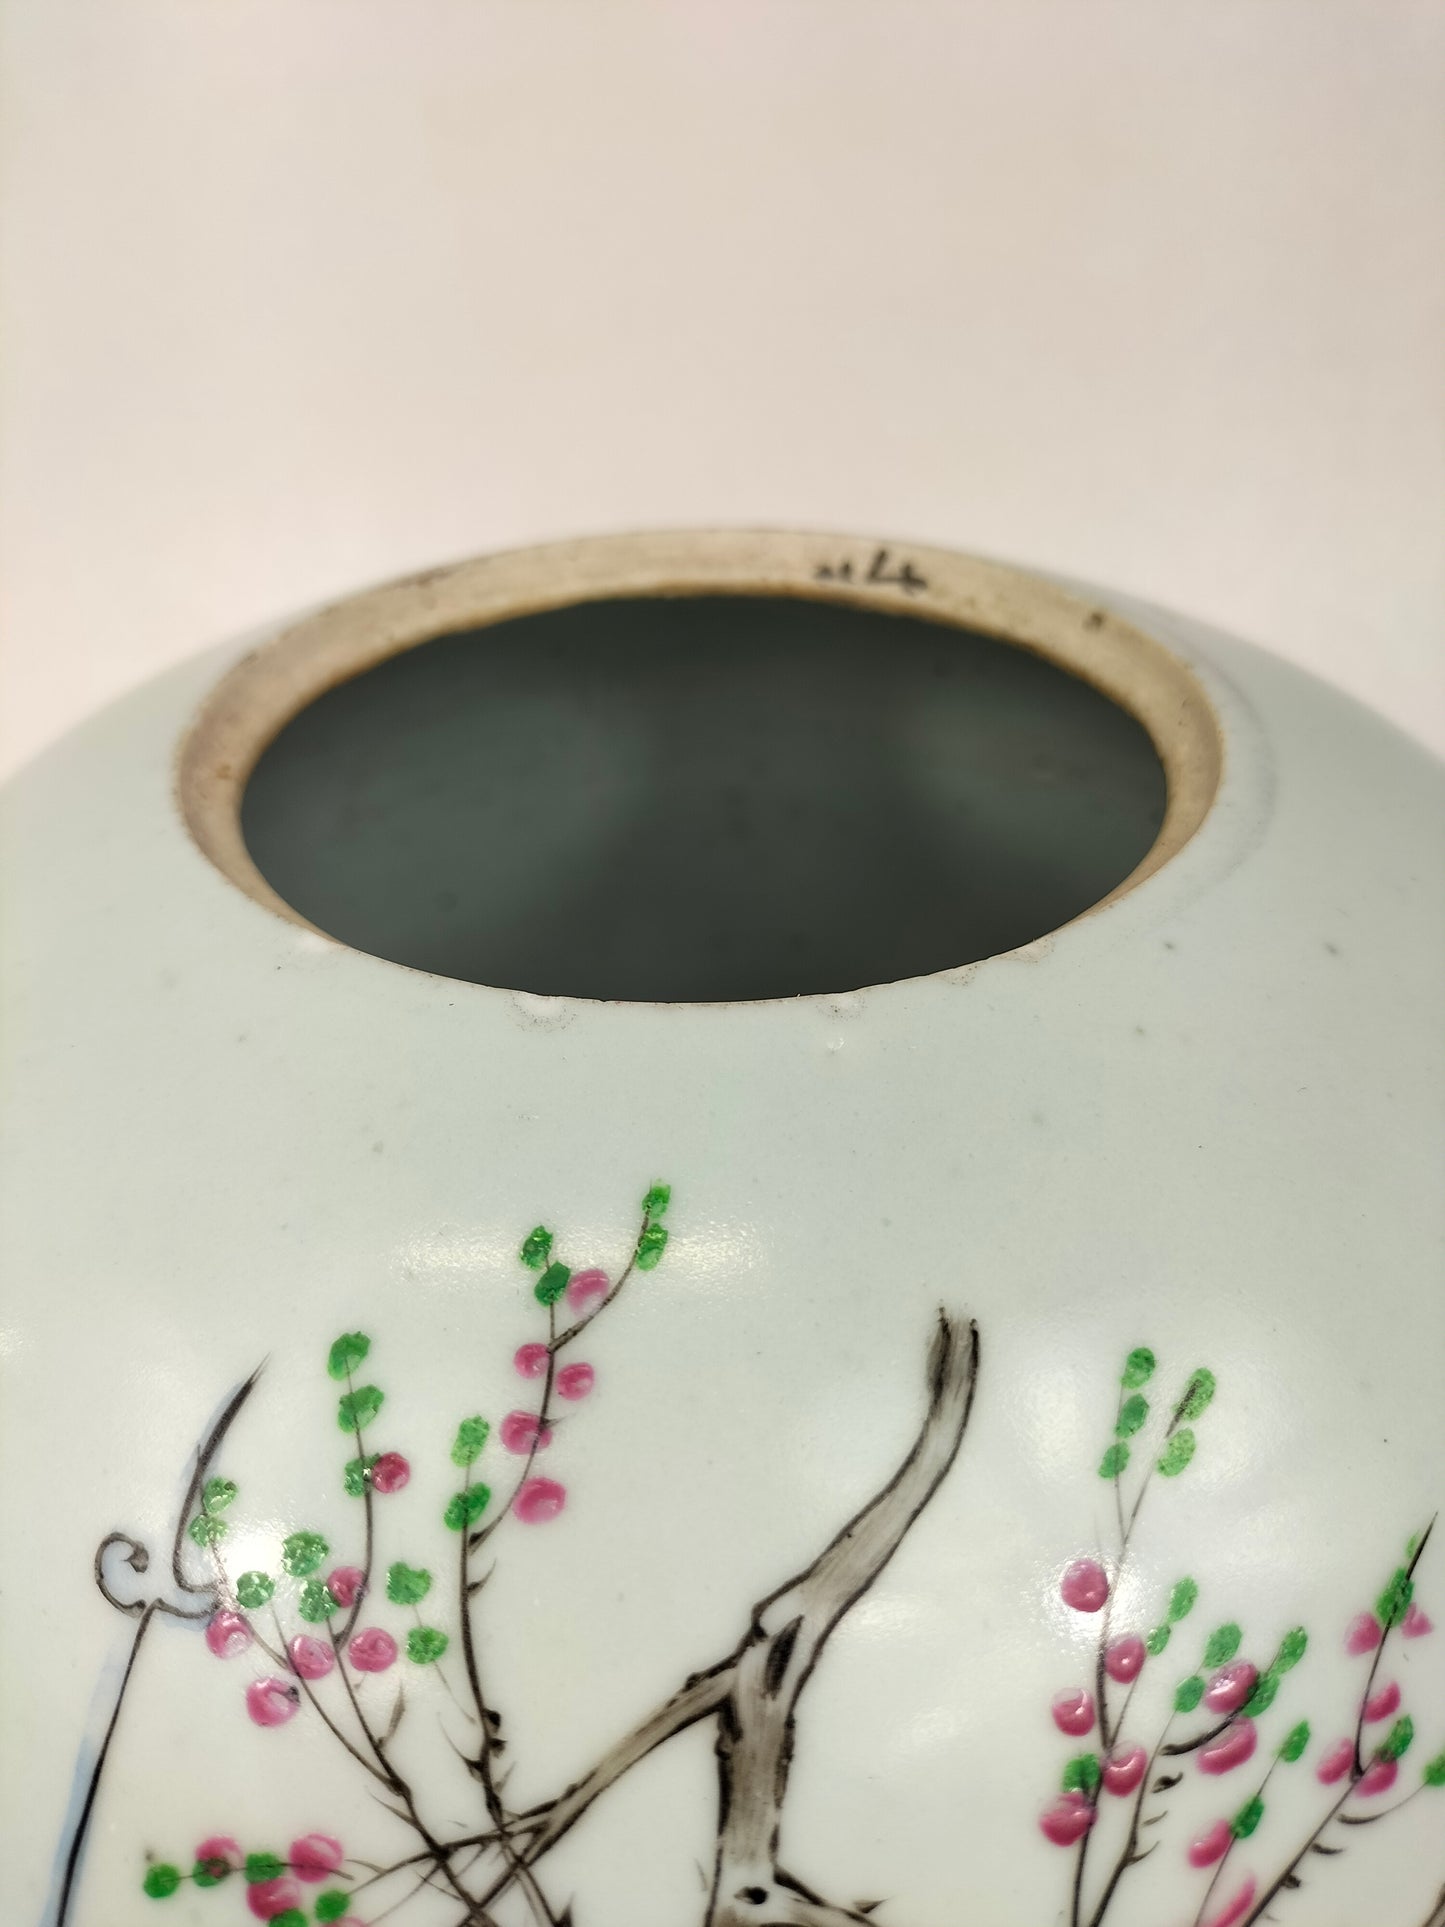 Antique Chinese qianjiang ginger jar decorated with a garden scene // Republic Period (1912-1949)